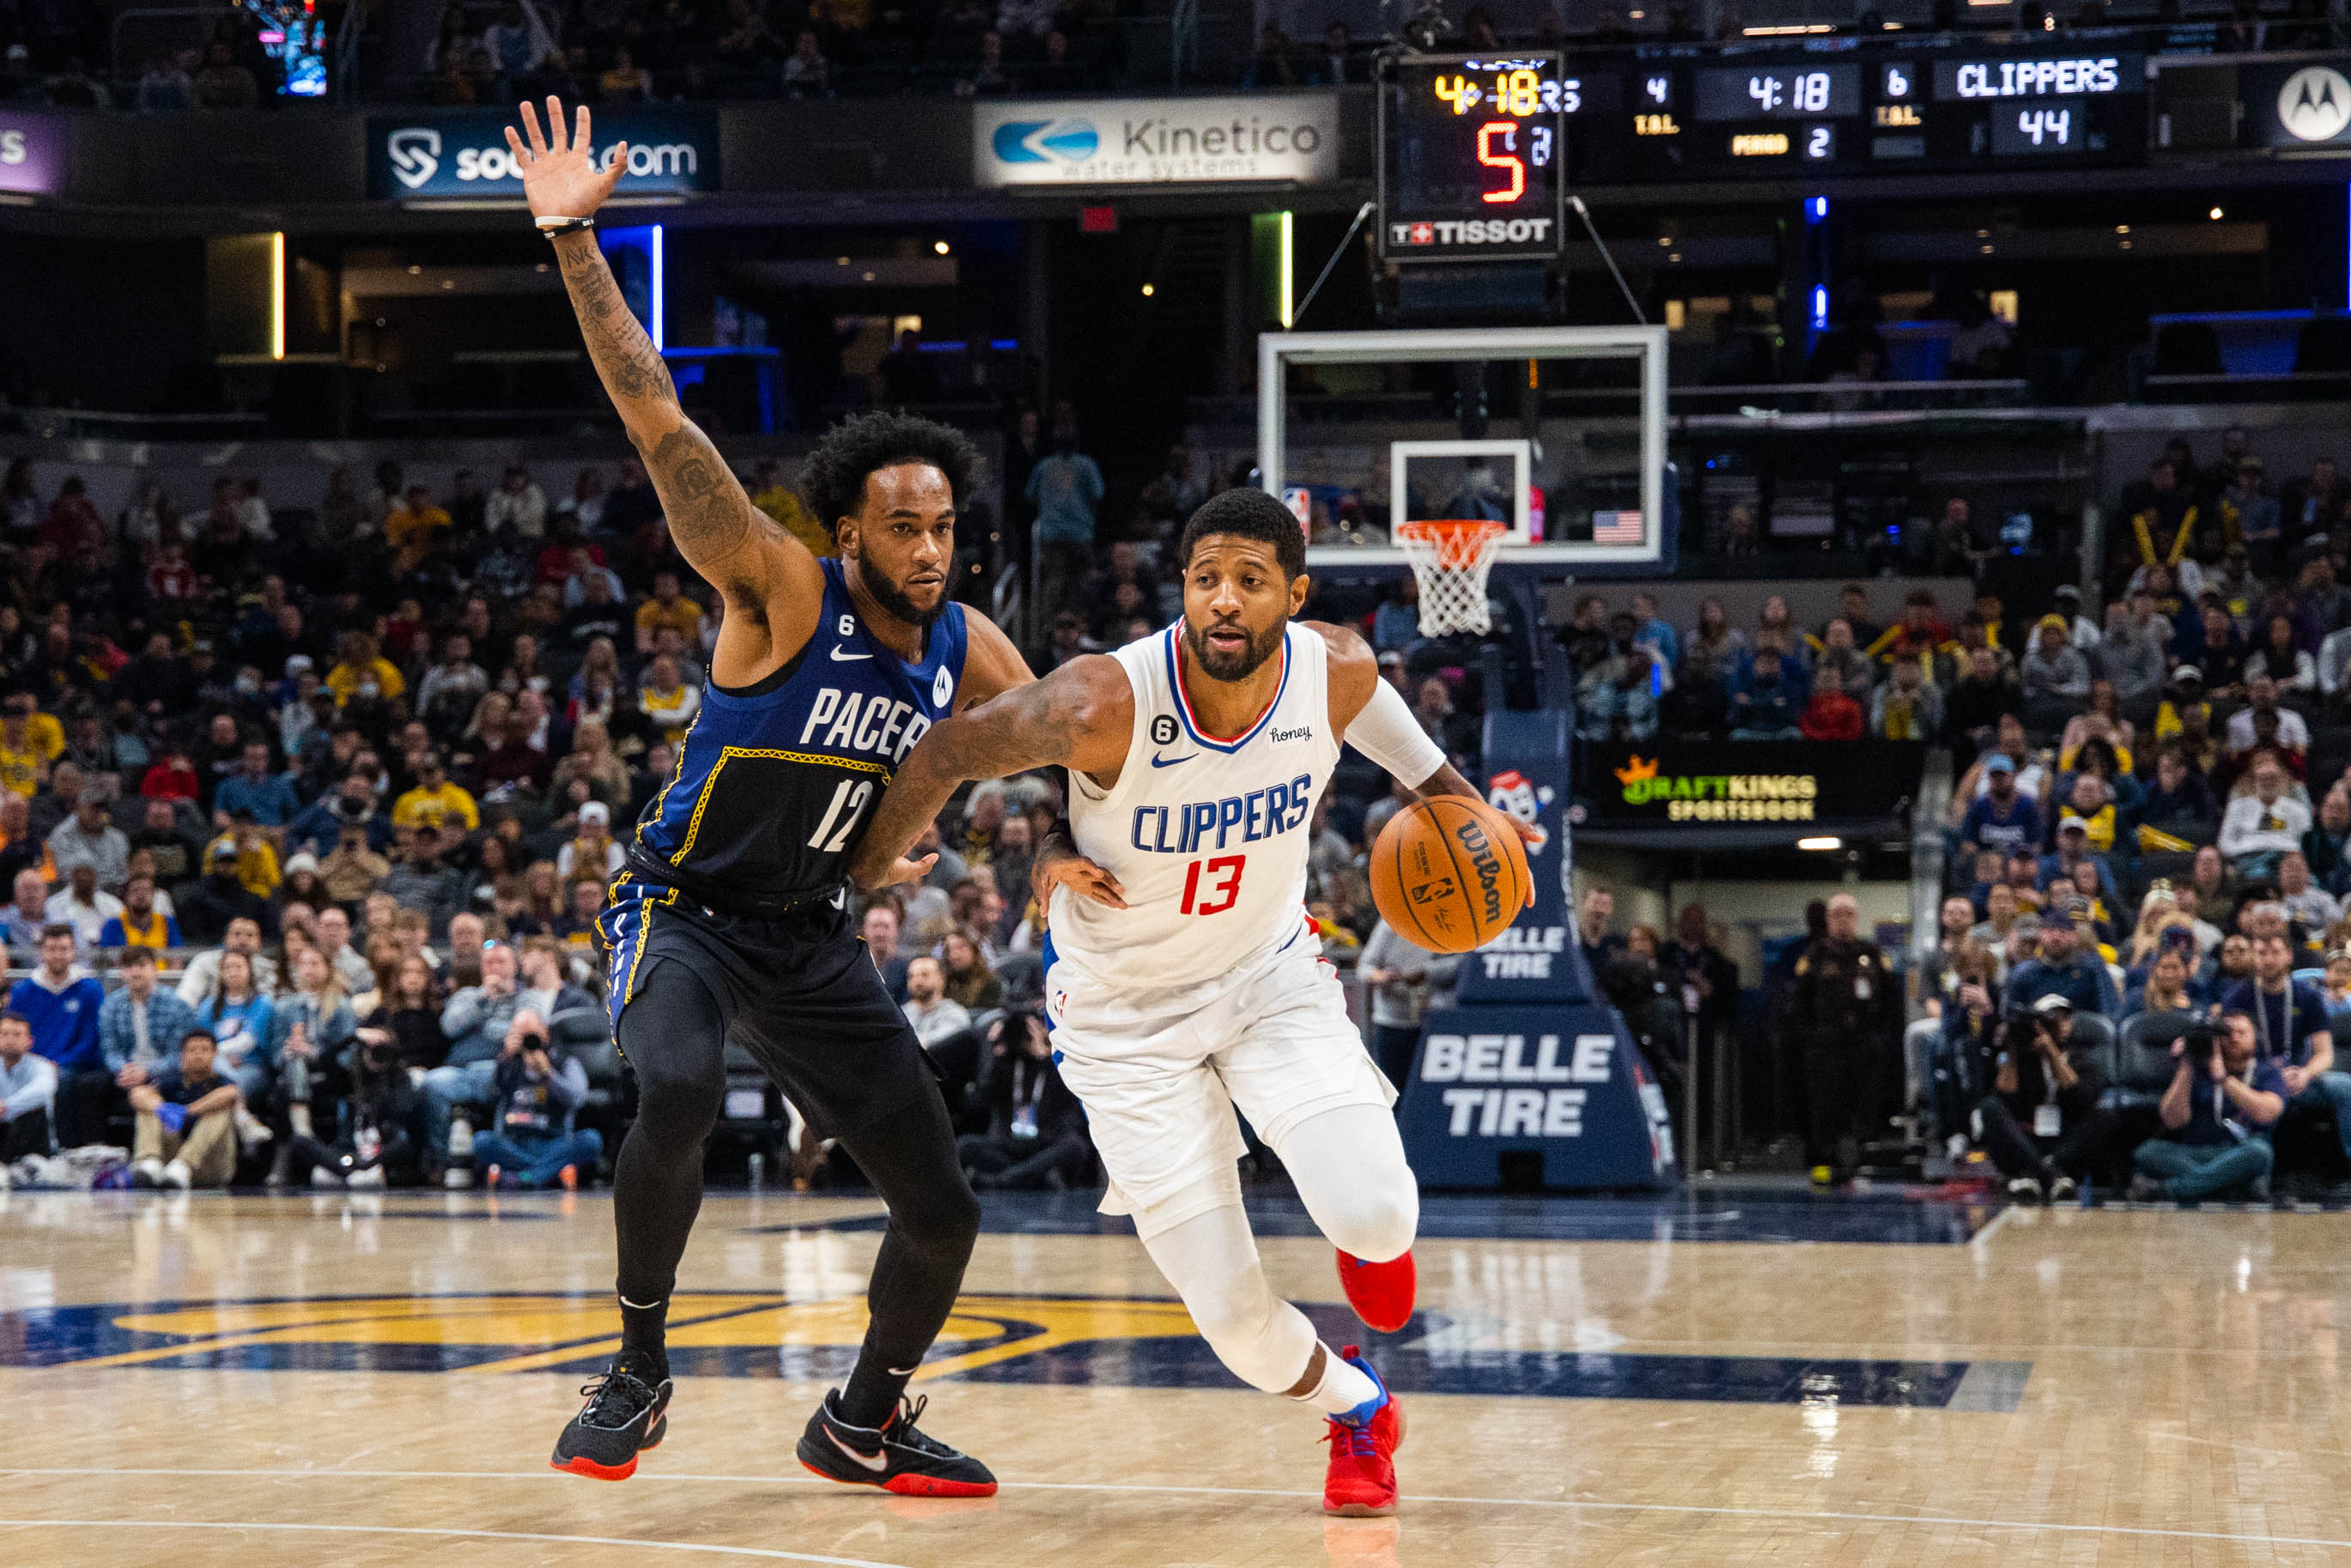 Indiana Pacers close out 2022 with impressive win over Los Angeles Clippers; Tyrese Haliburton and Myles Turner shine